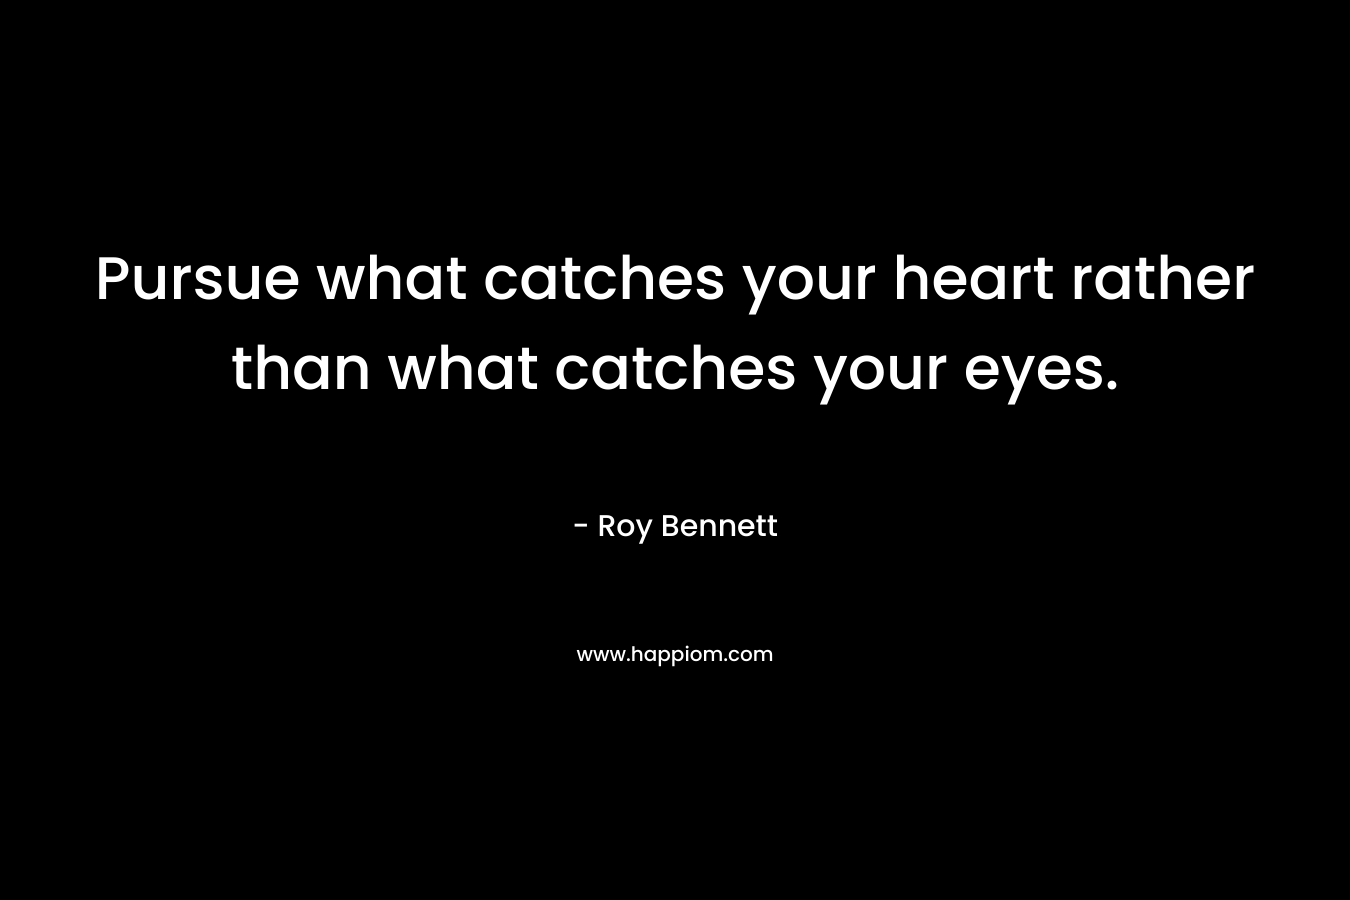 Pursue what catches your heart rather than what catches your eyes.